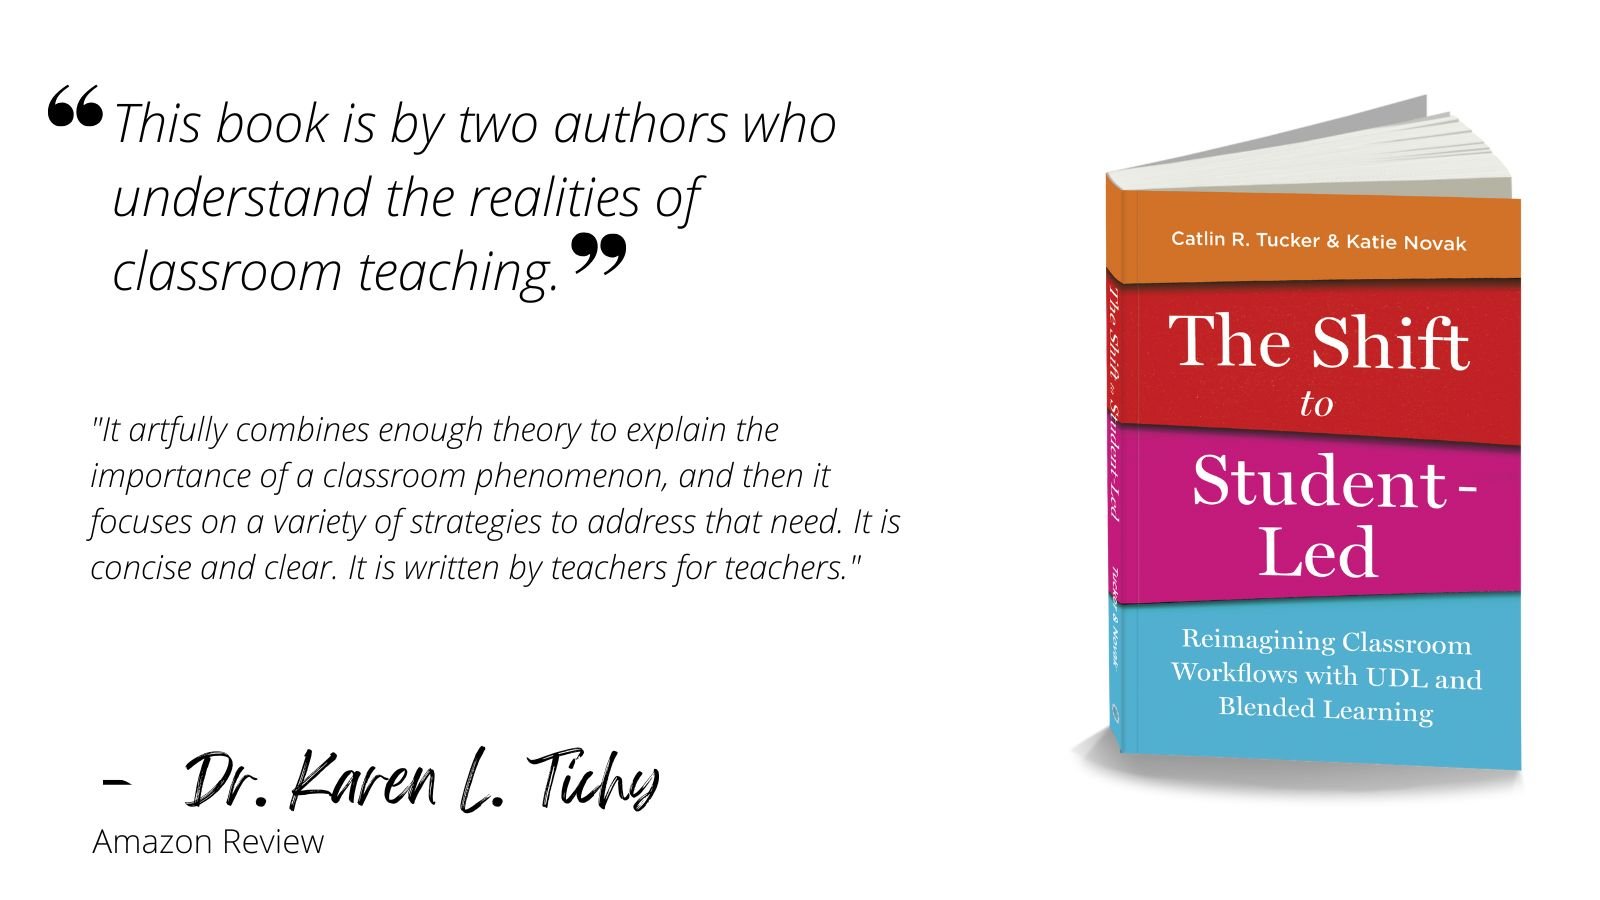 This book is by two authors who understand the realities of classroom teaching. It artfully combines enough theory to explain the importance of a classroom phenomenon, and then it focuses on a variety of strategies to address that need. It is concise and clear. It is written by teachers for teachers.